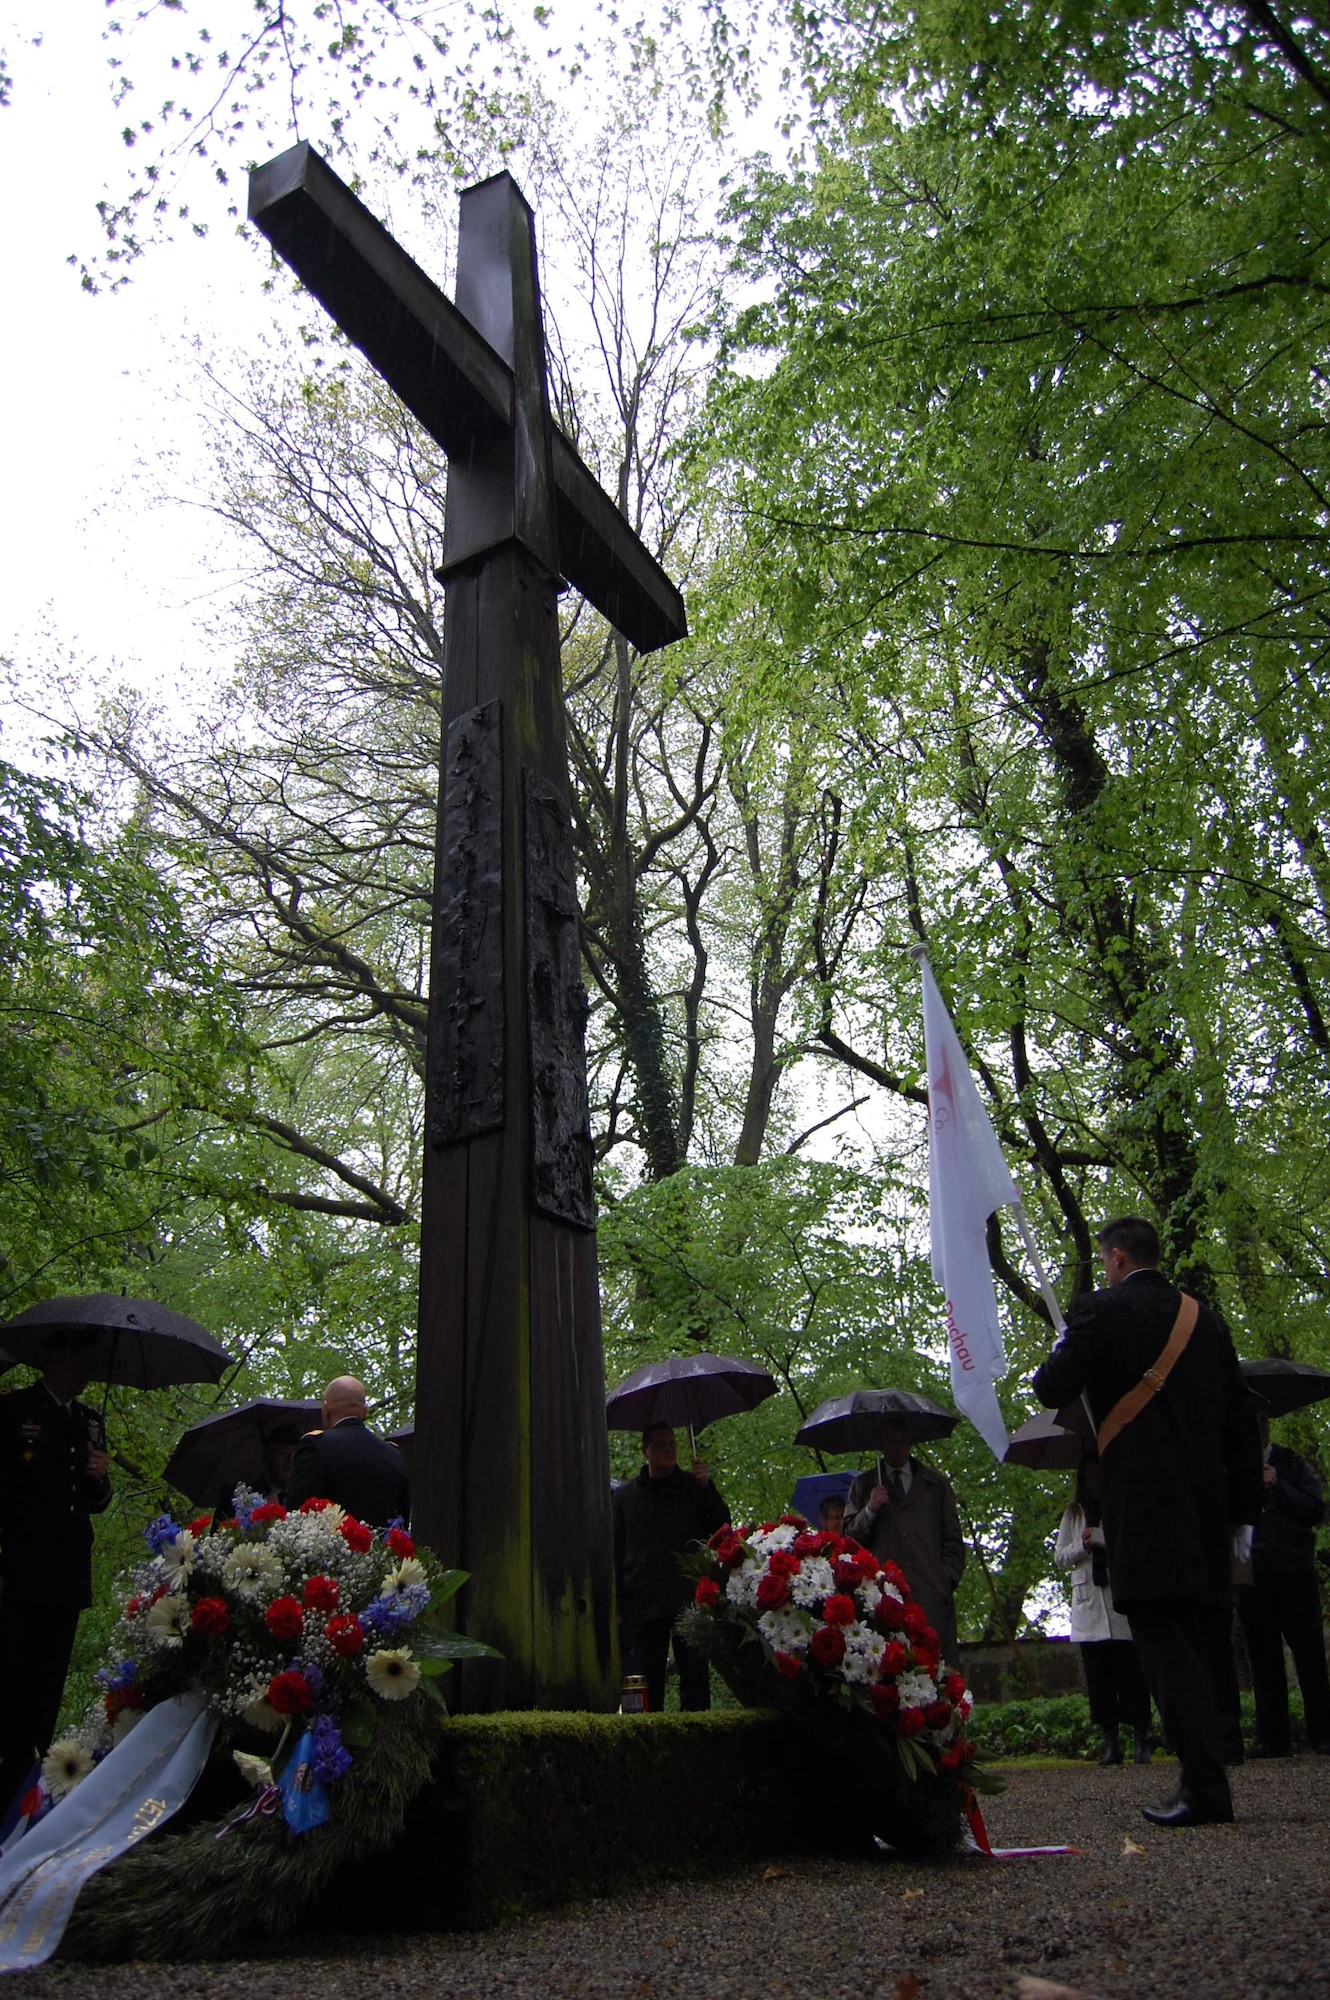 Members of the Colorado and Oklahoma National Guards honor those who died in Dachau Concentration Camp during World War II by laying a wreath at the Leitenberg Cemetery in Dachau, Germany, where over 7,400 prisoners were buried. Members of the Colorado and Oklahoma National Guard participated in various ceremonies May 1-3, 2015, commemorating the 70th anniversary of the liberation of the concentration camp, Dachau. The 157th Infantry Regiment, one of the units that liberated the camp on April 29, 1945, initially mustered from the state of Colorado. The regiment was a subordinate unit to the 45th Infantry Division, initially formed in Oklahoma. (Air National Guard photo by Capt. Kinder Blacke)